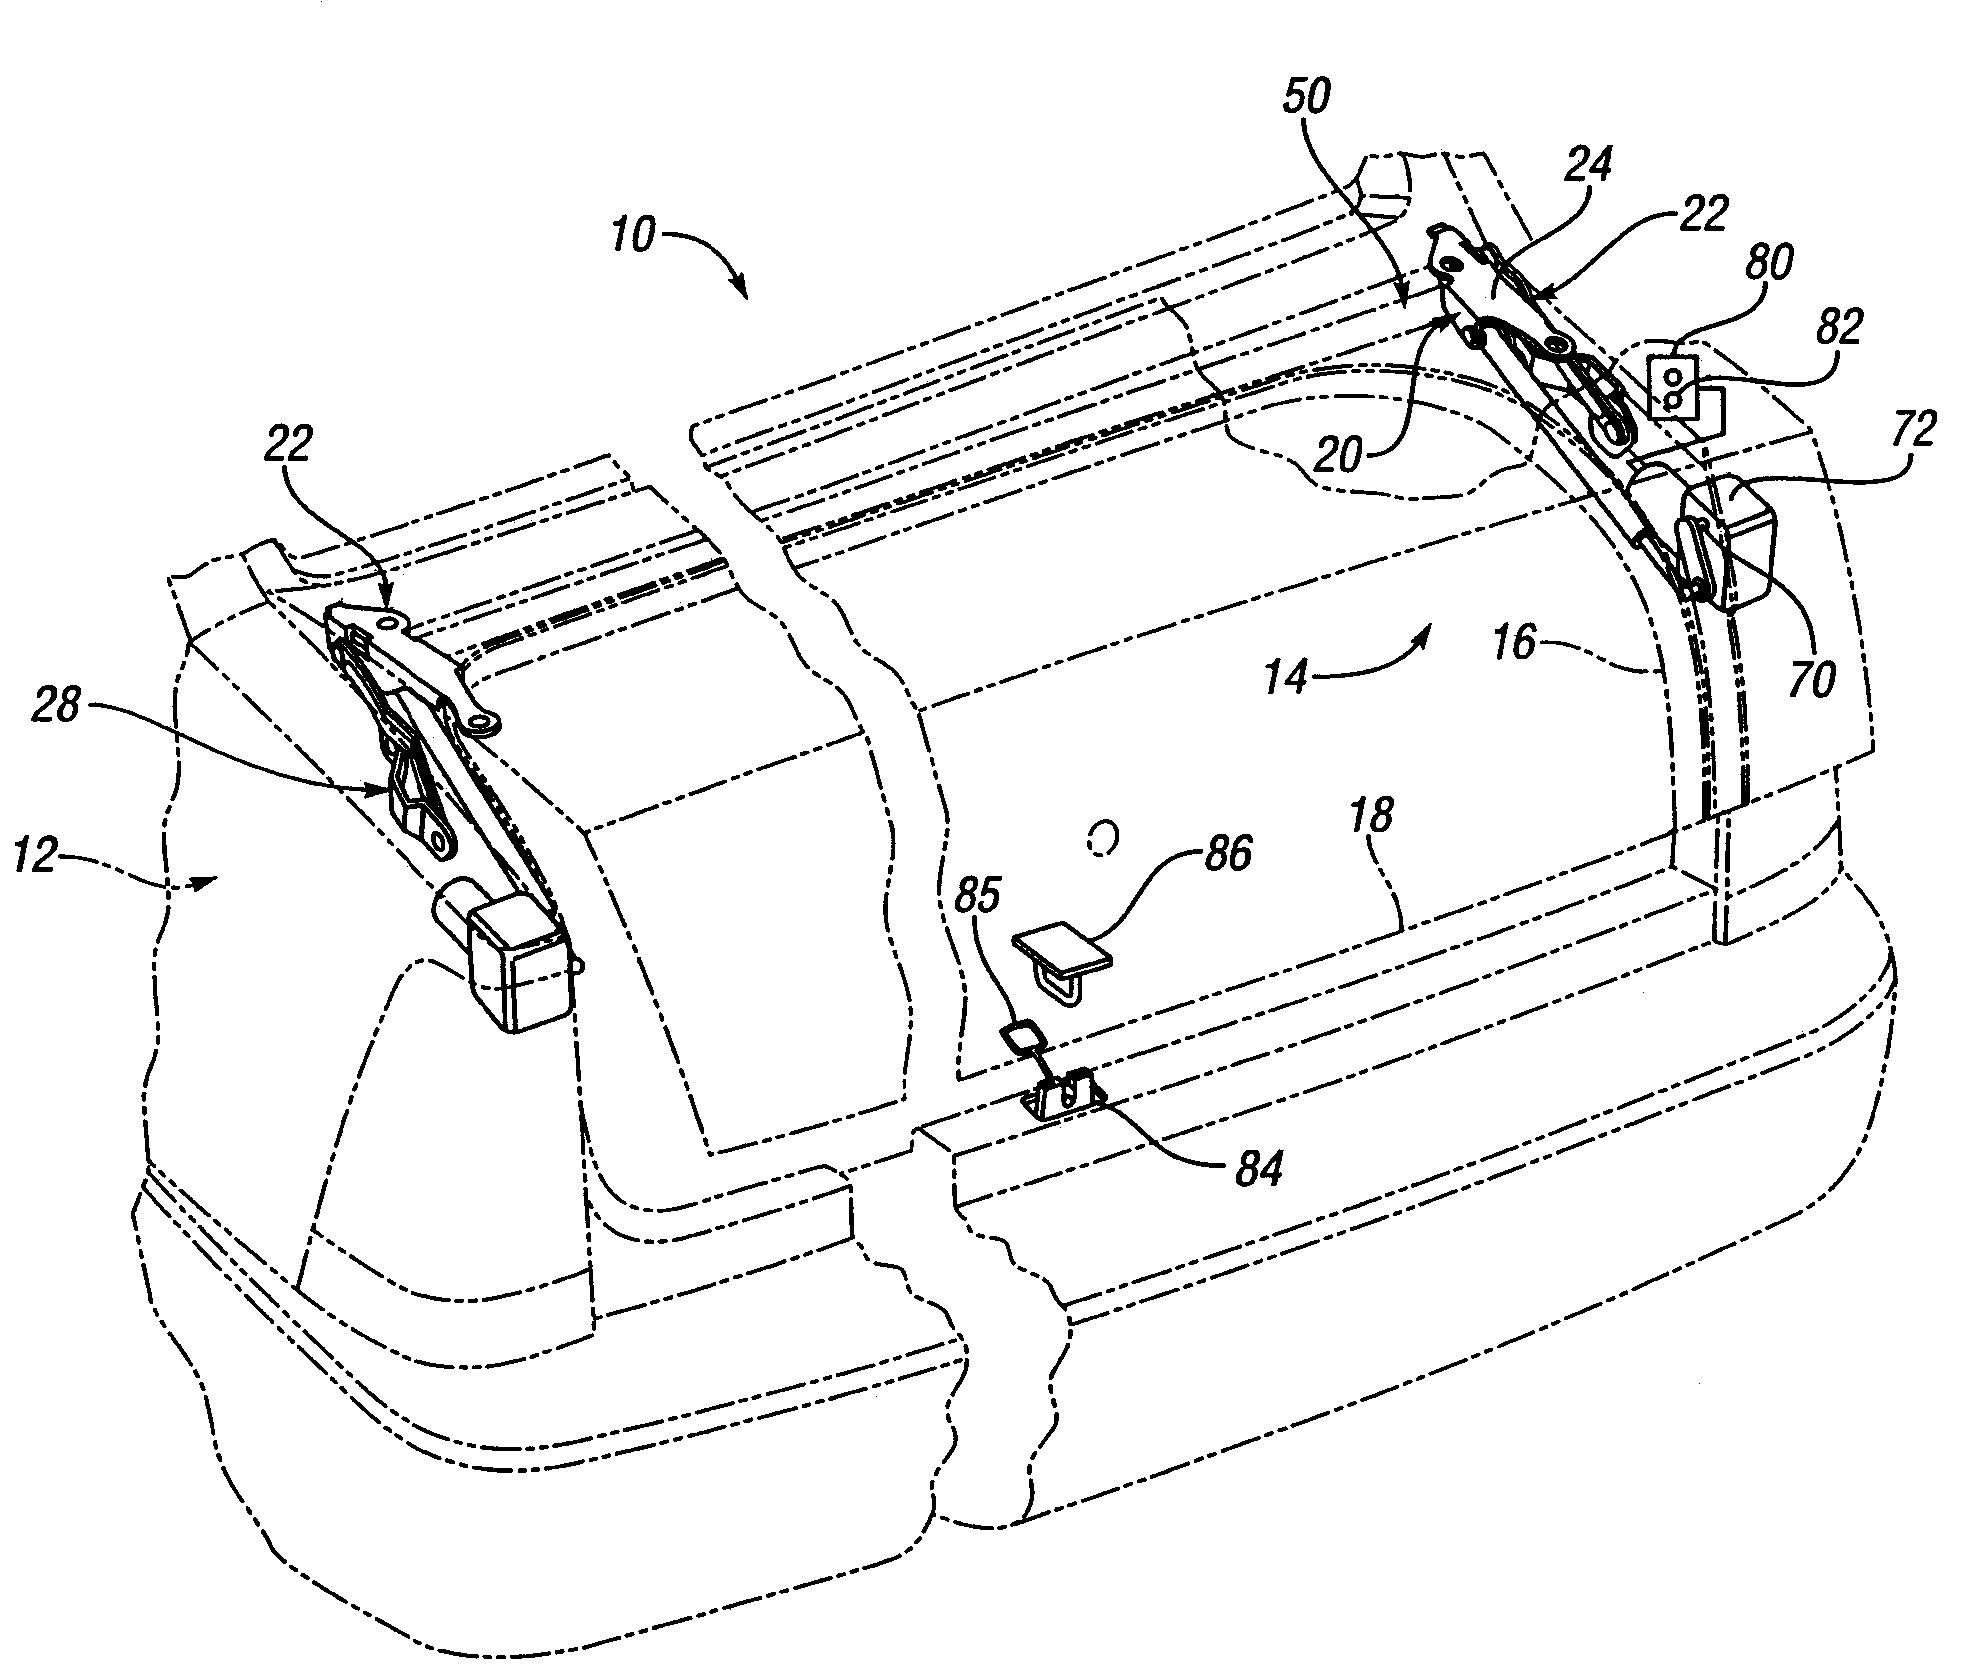 Decklid hinge with motor to automate opening and closing